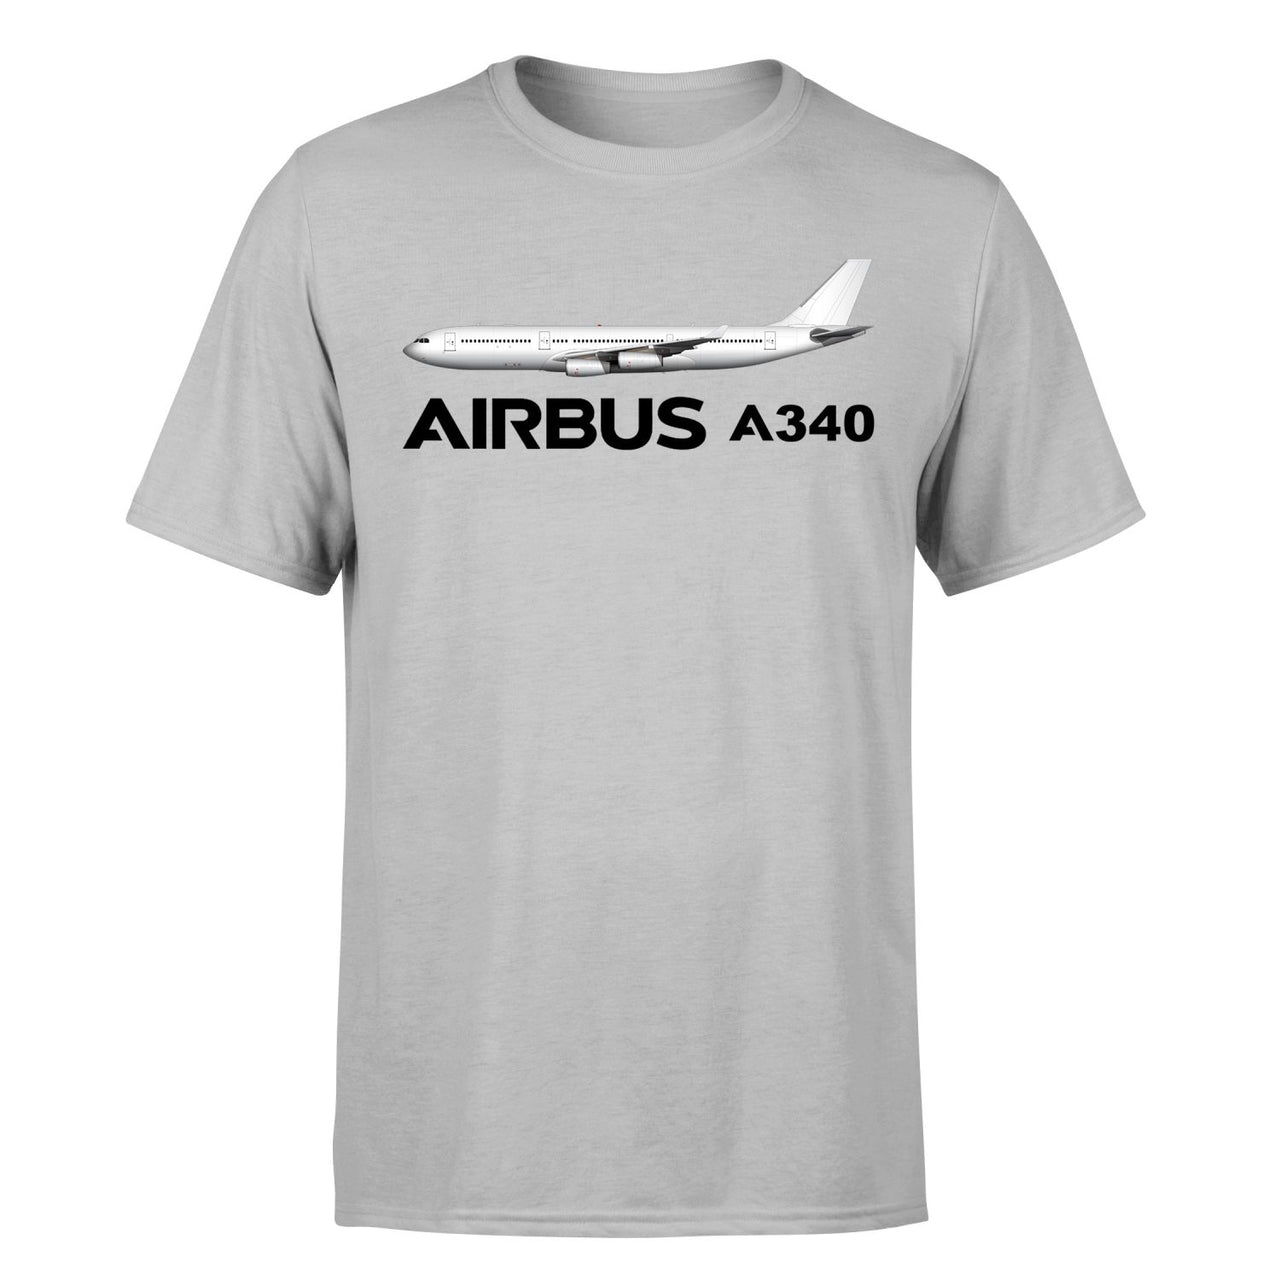 The Airbus A340 Designed T-Shirts